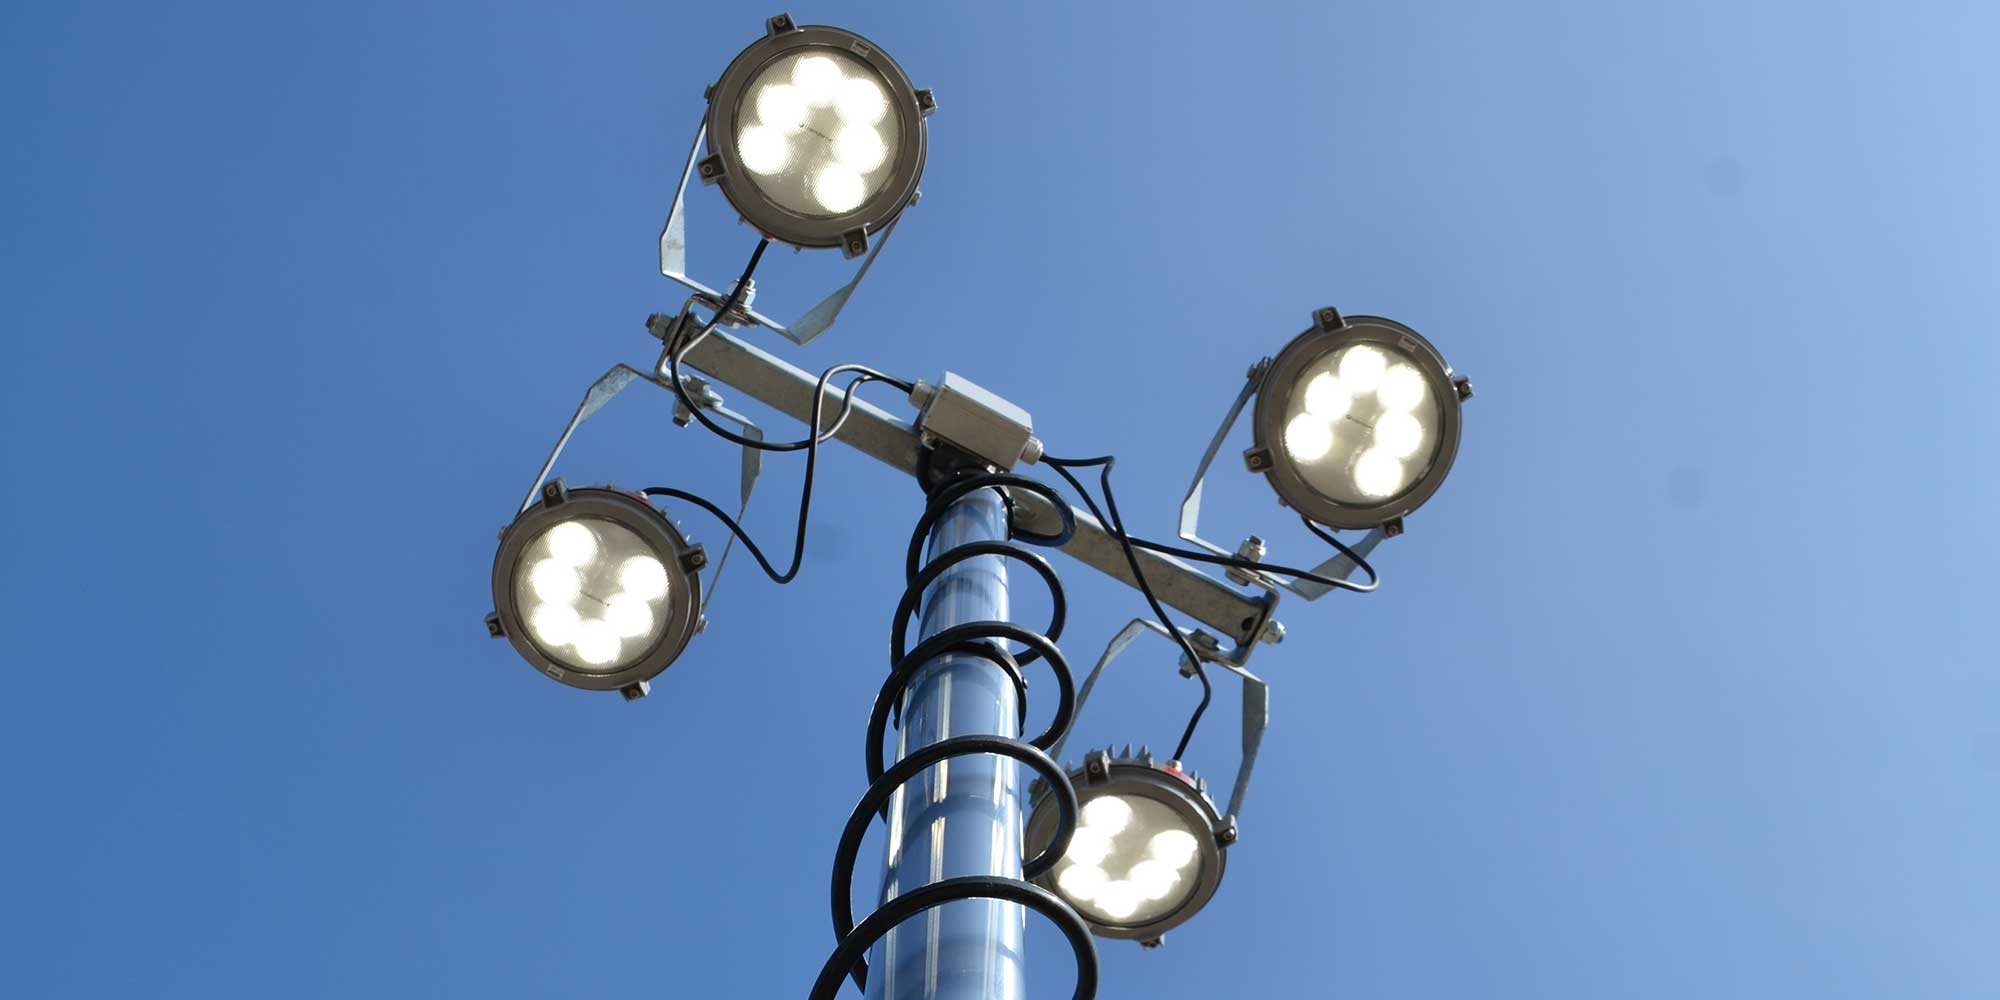 Ecolite TH200 hydrogen mobile lighting tower